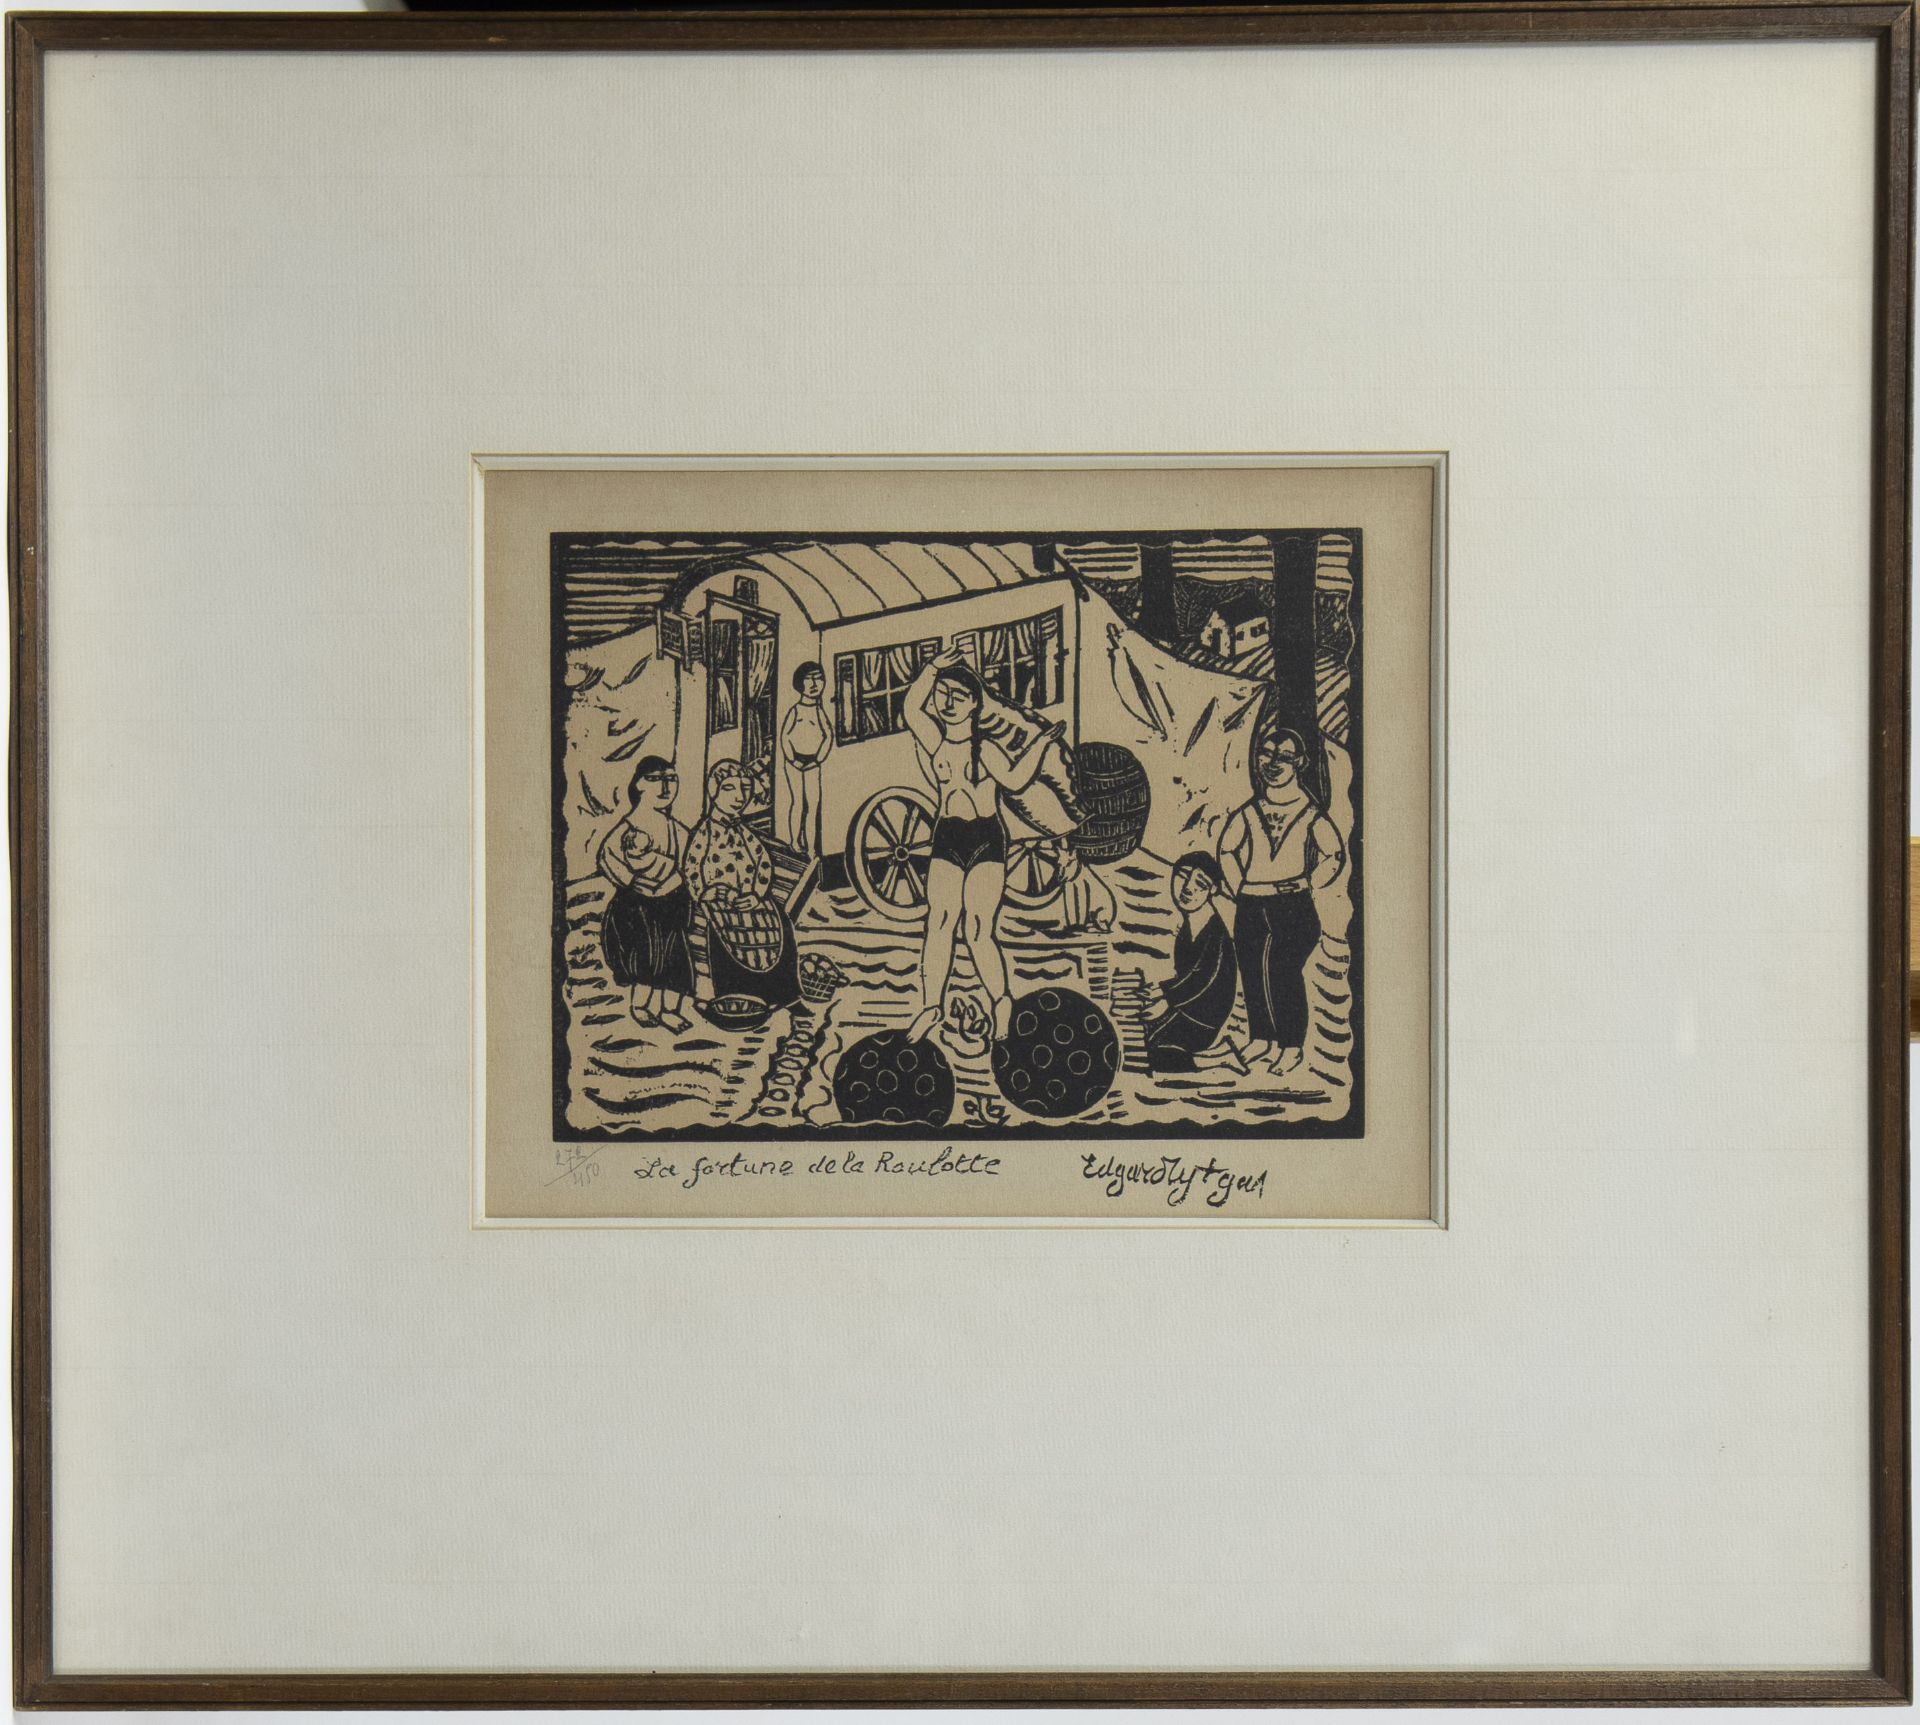 Edgard TYTGAT (1879-1957), woodcut La fortune de la roulotte, numbered 272/450 and signed in the pla - Image 6 of 8